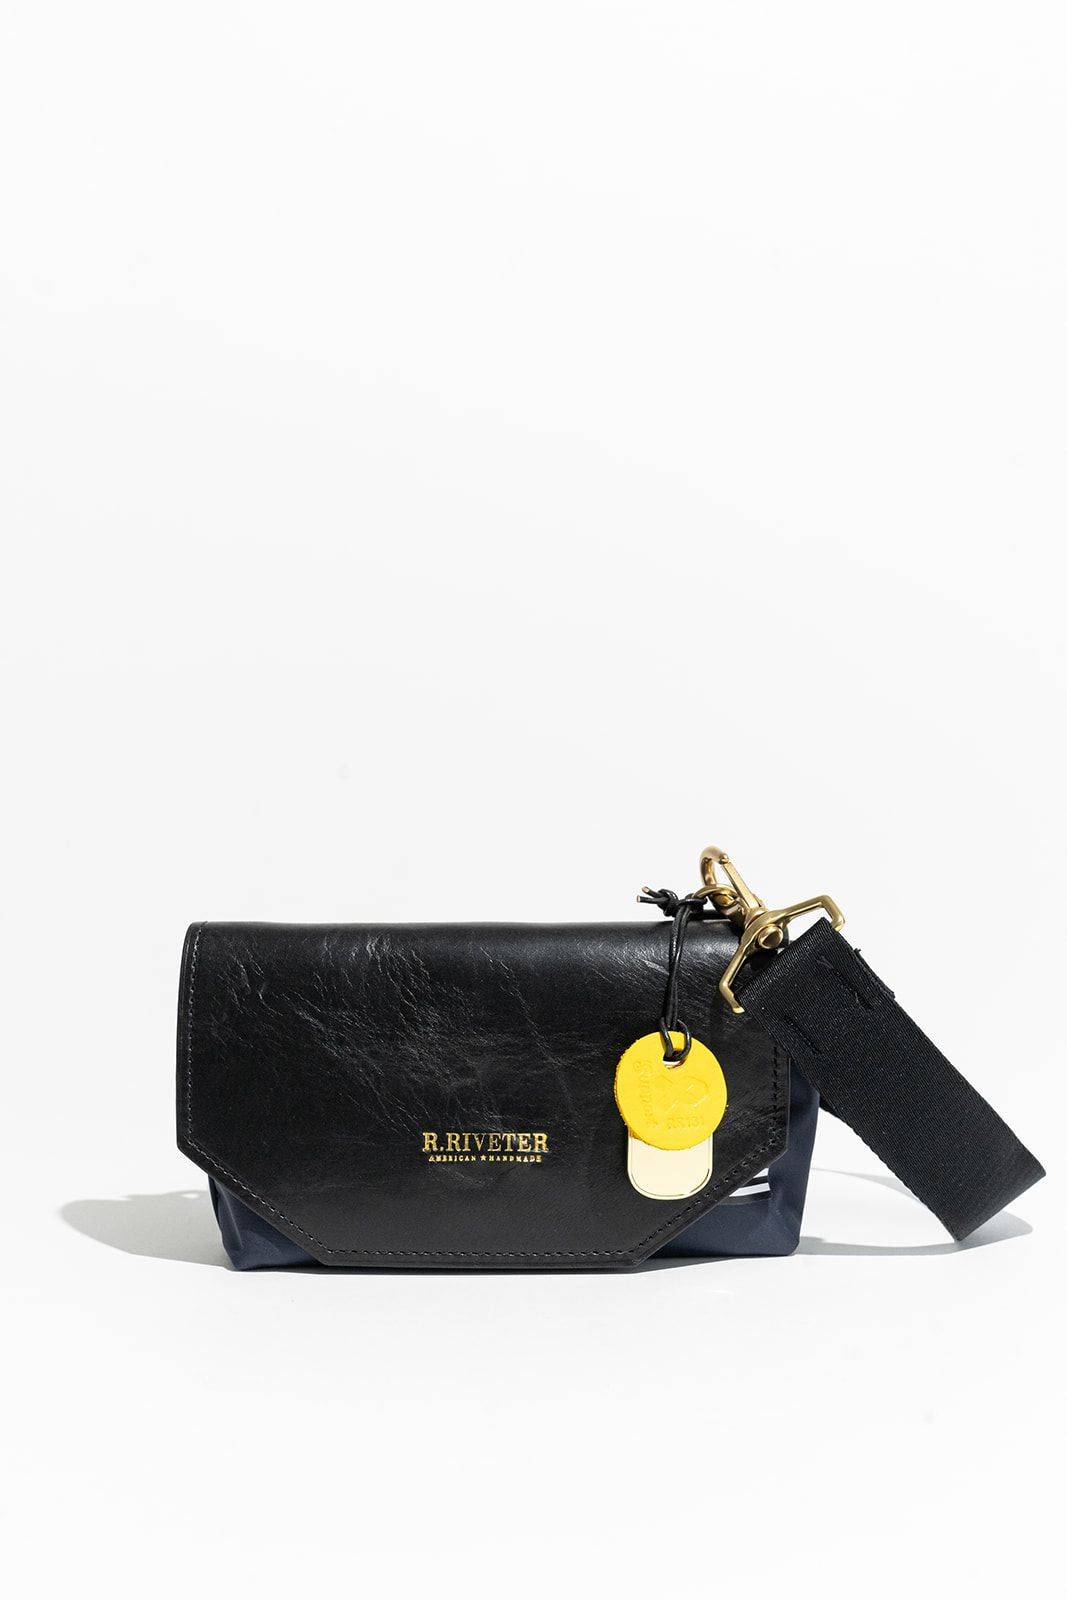 Whittle | Special Edition LEO Navy Nylon + Black Leather